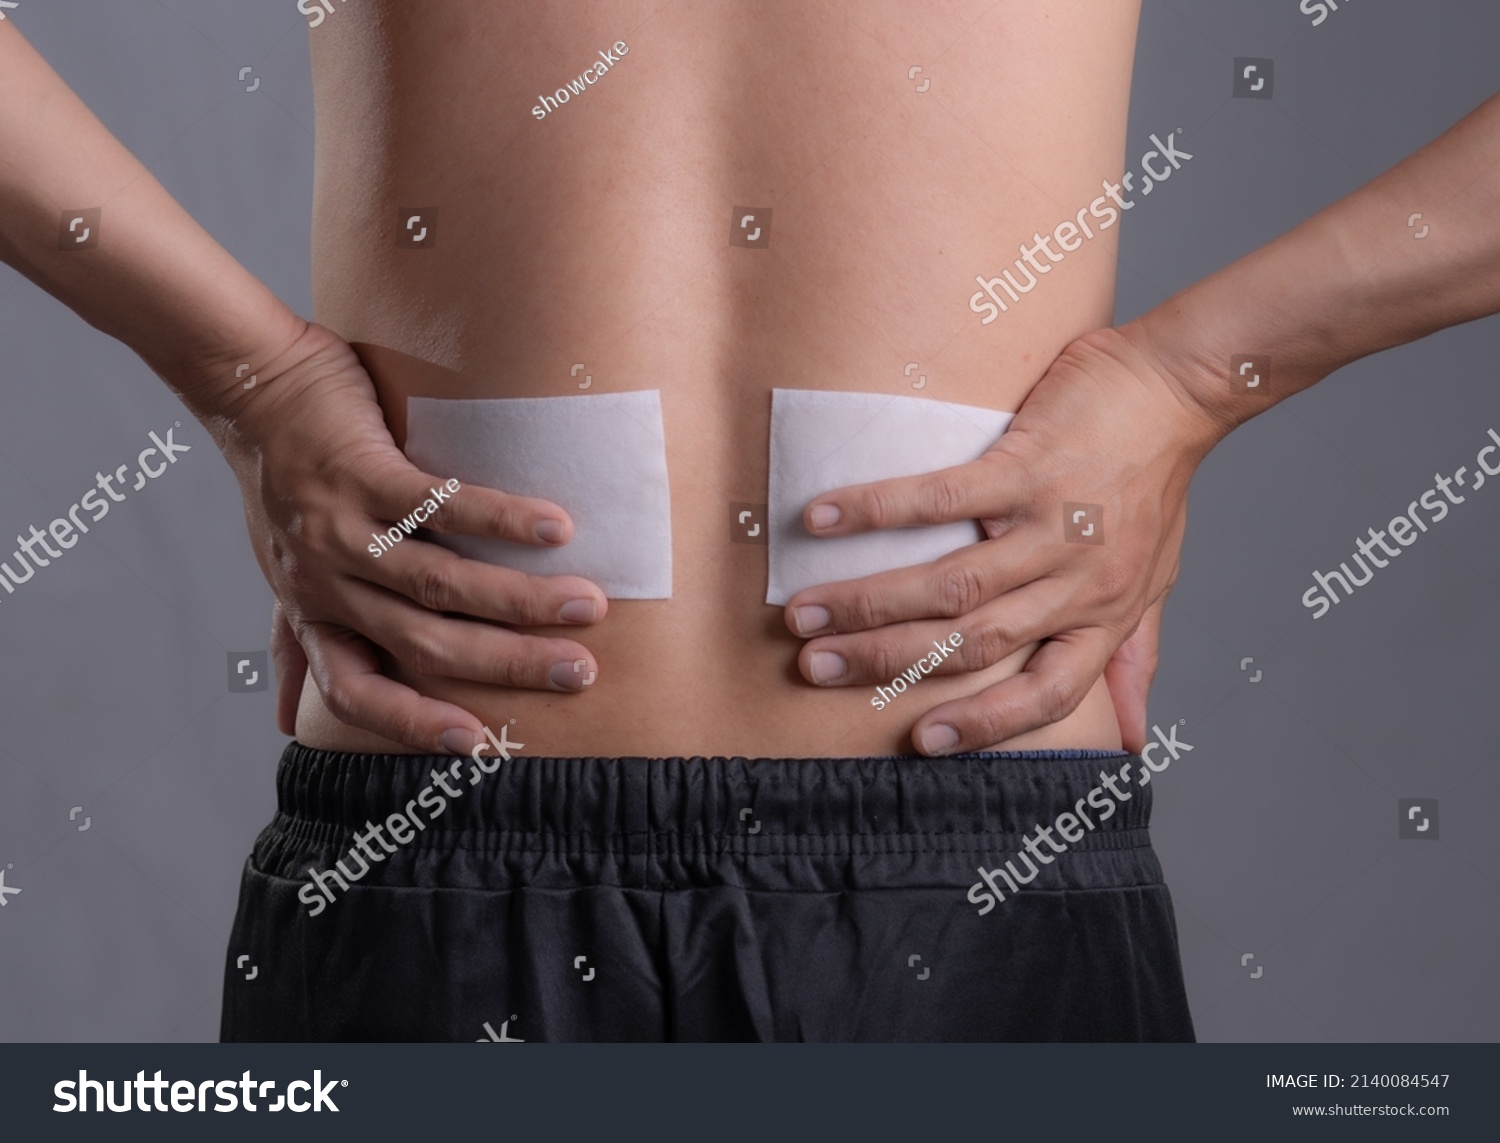 Medicated pain relief patch with man pain Lower Back,office syndrome,Health problems from overworked concept. #2140084547